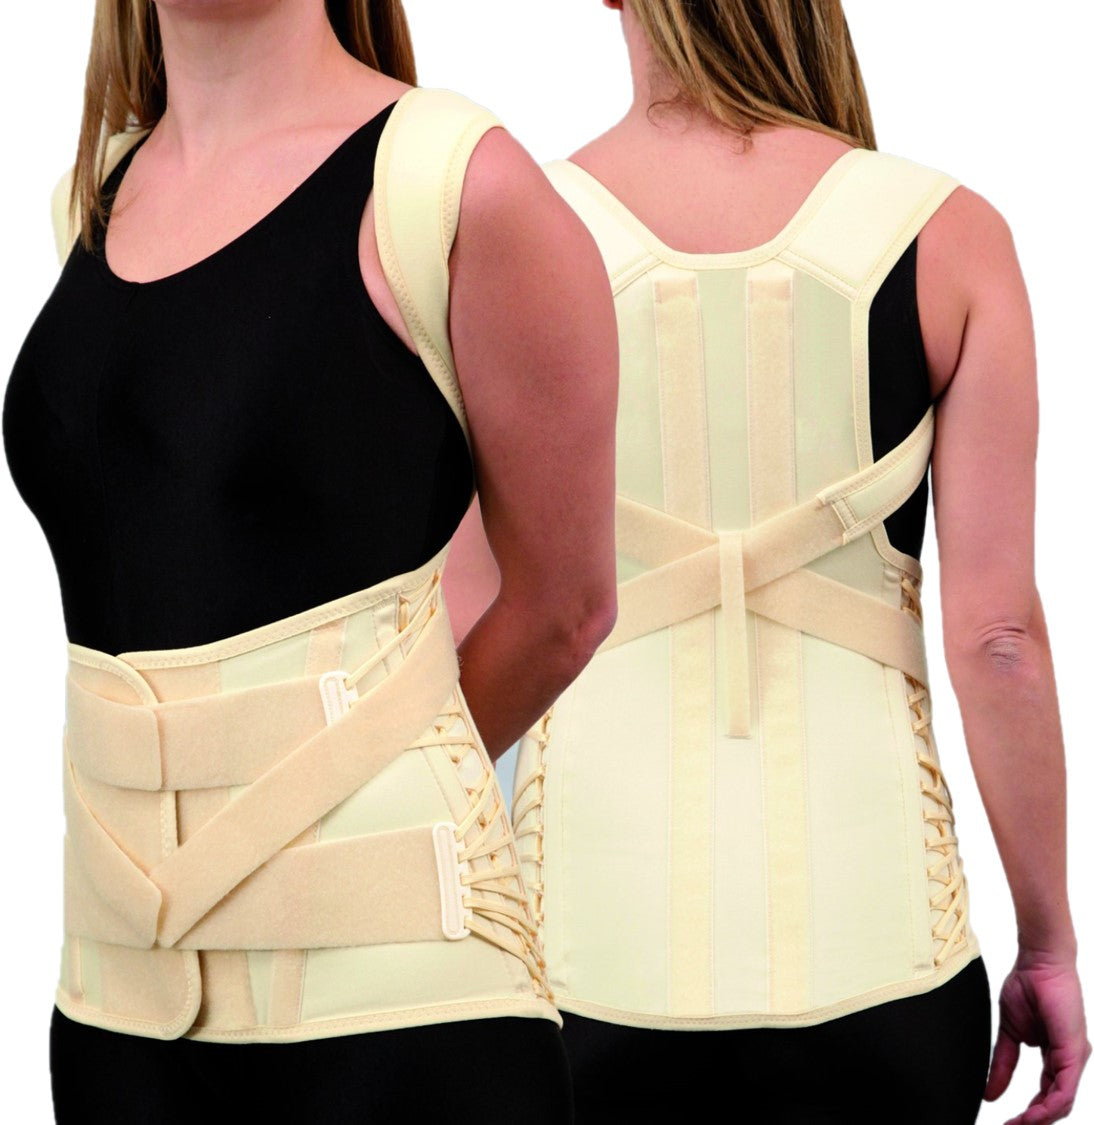 Colombian Full Body Support Arm Compression Cross Compression Body